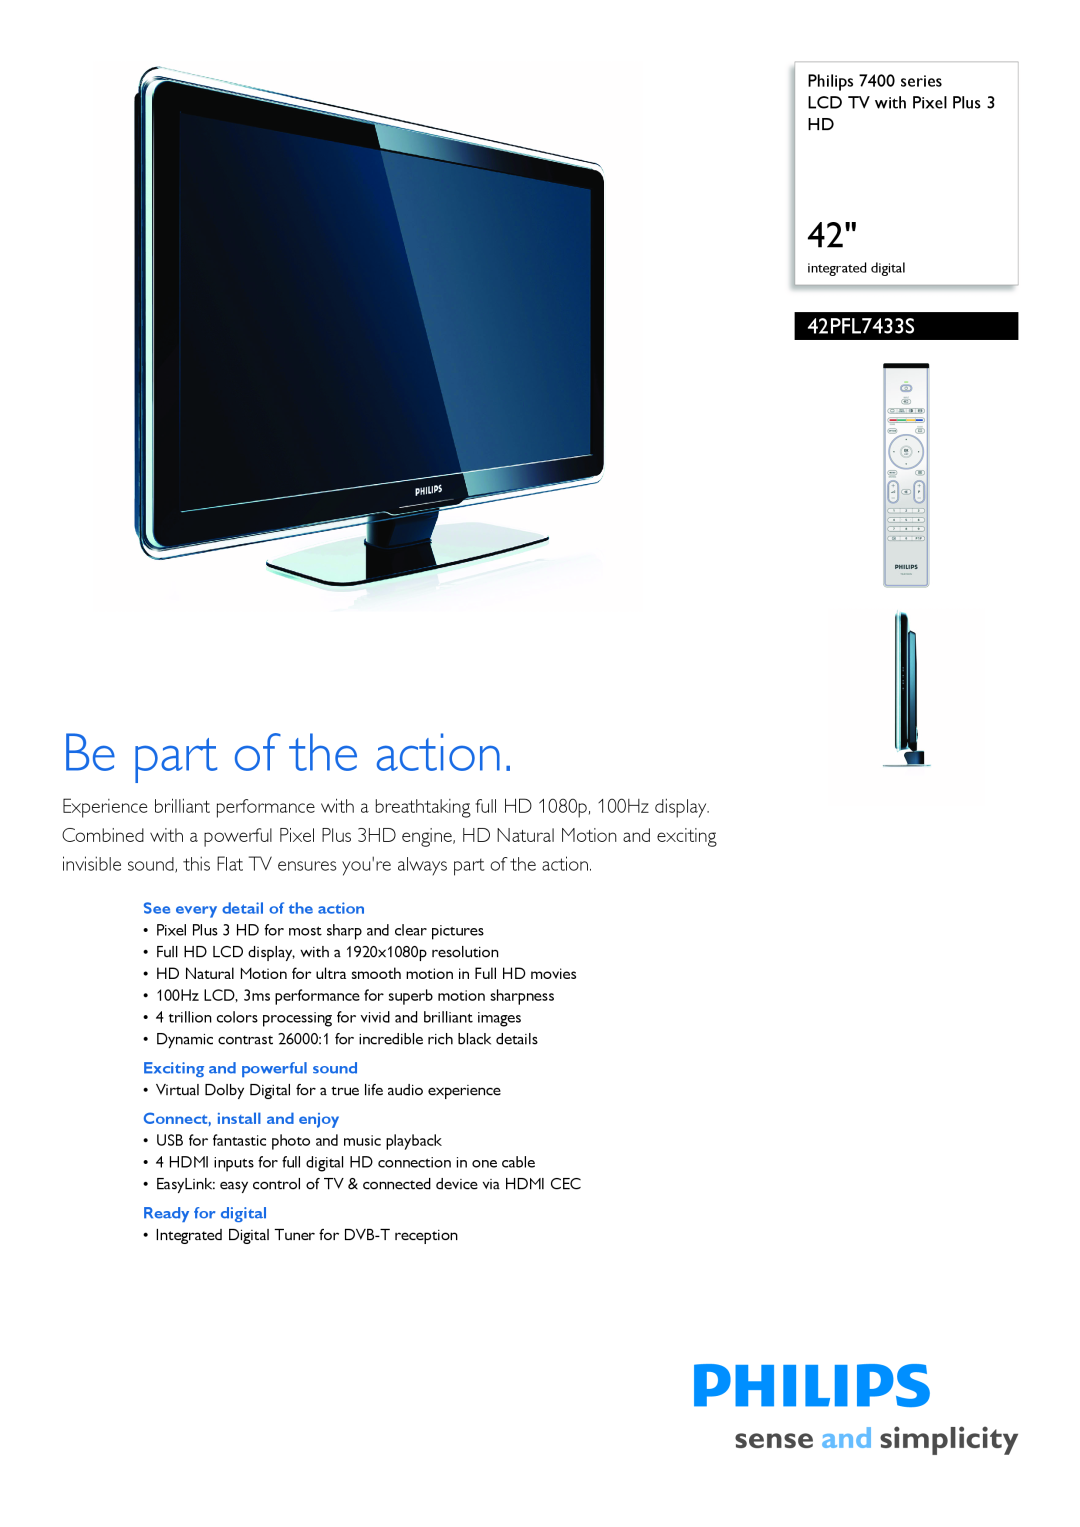 Philips 42PFL7433S manual Philips 7400 series LCD TV with Pixel Plus HD, Be part of the action 